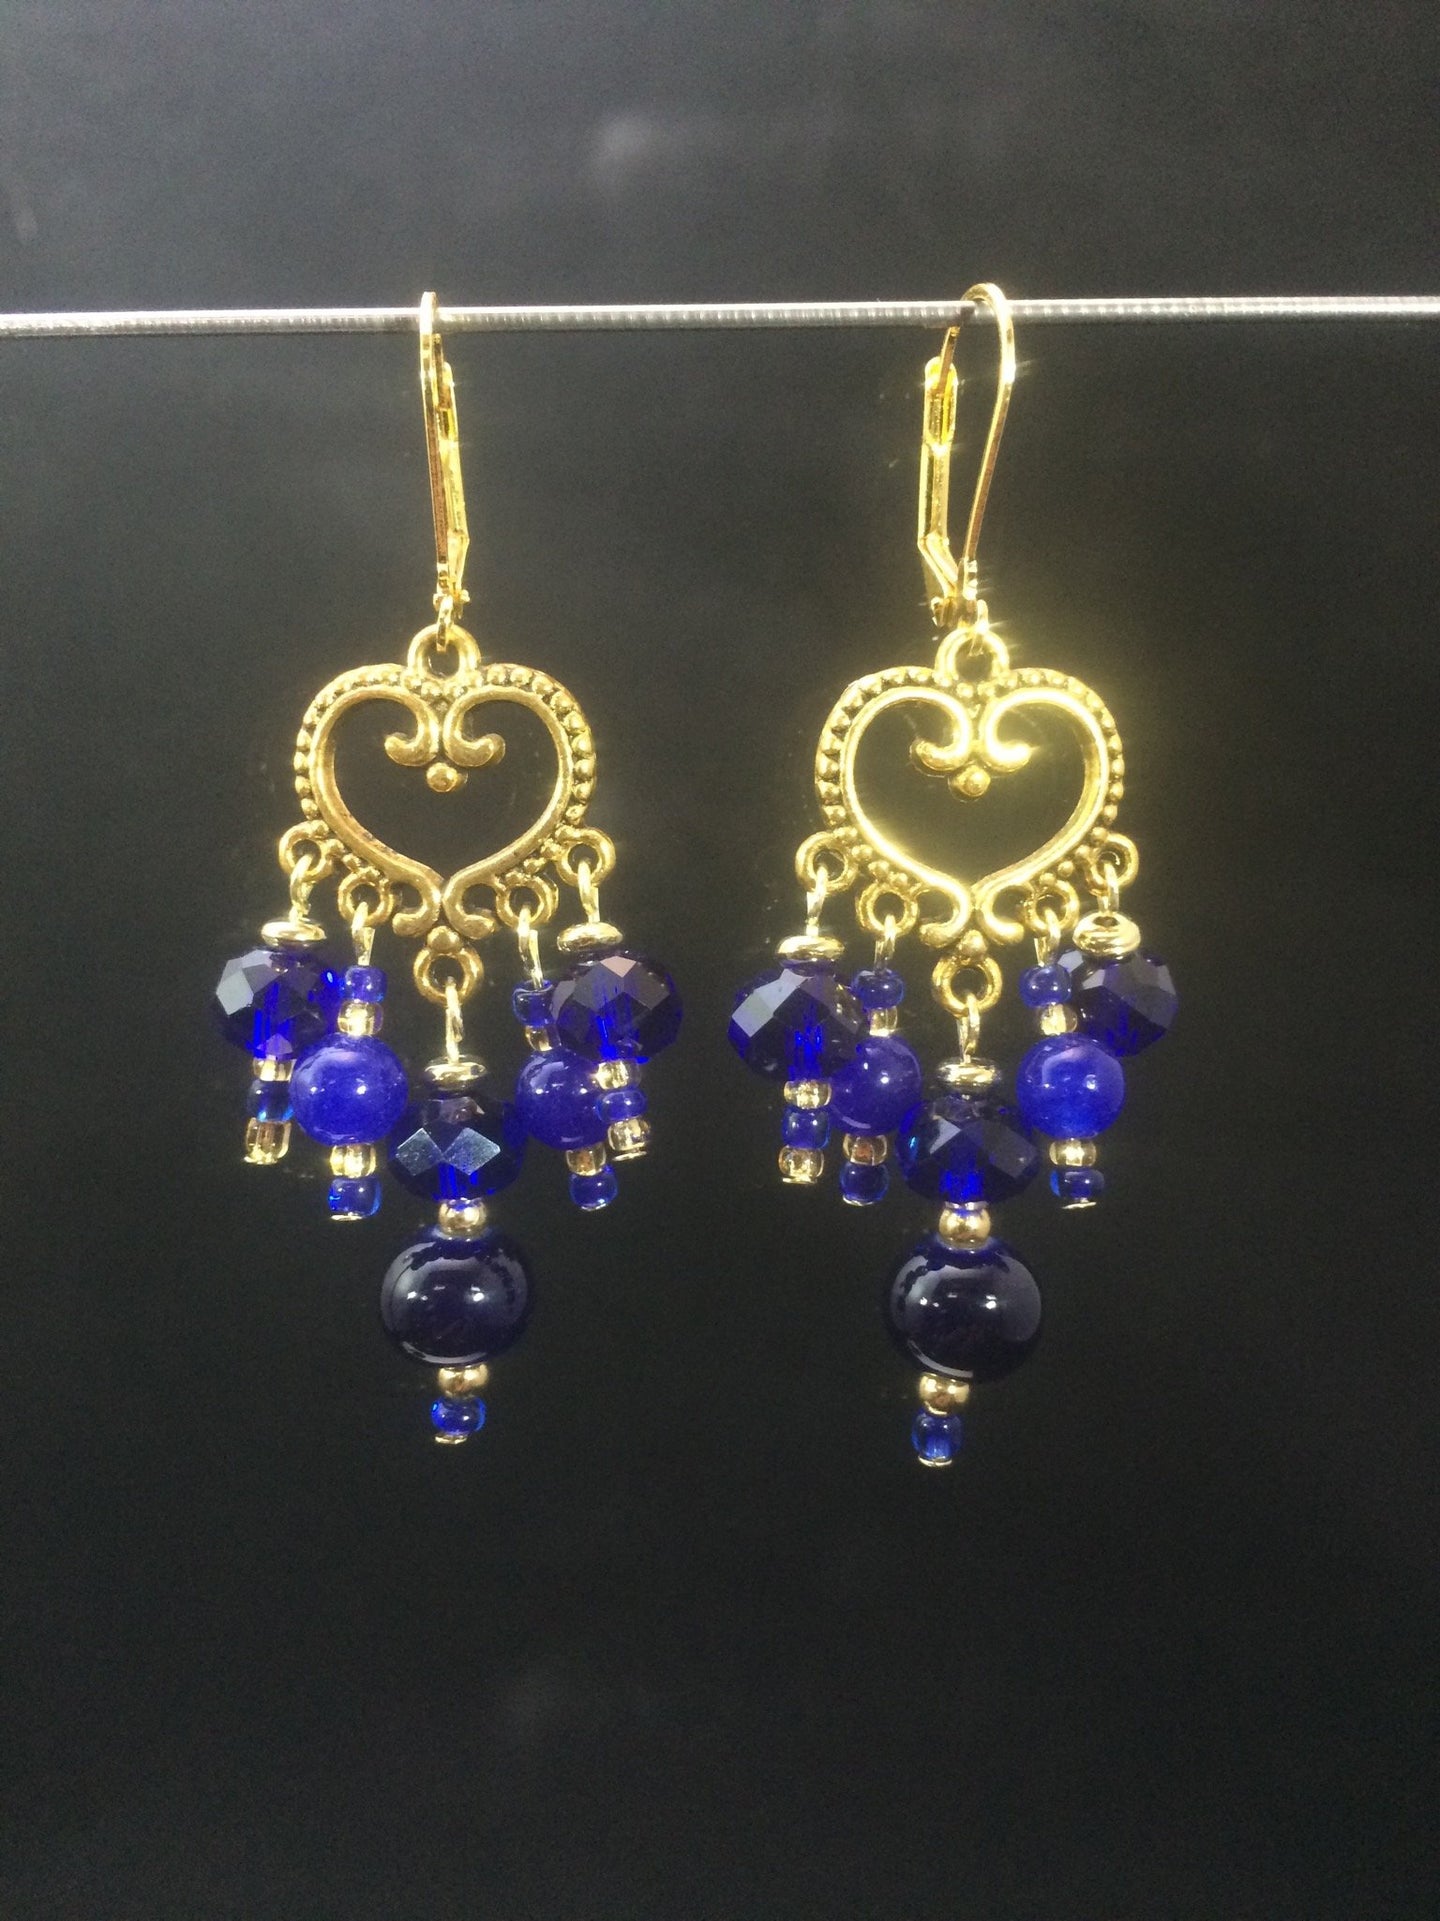 These chandelier-styleåÊleverbackåÊearrings featureåÊa heart-shaped, plated base metalåÊcentral focal, withåÊa mixture of blue faceted glass beads and colored glass pearls.